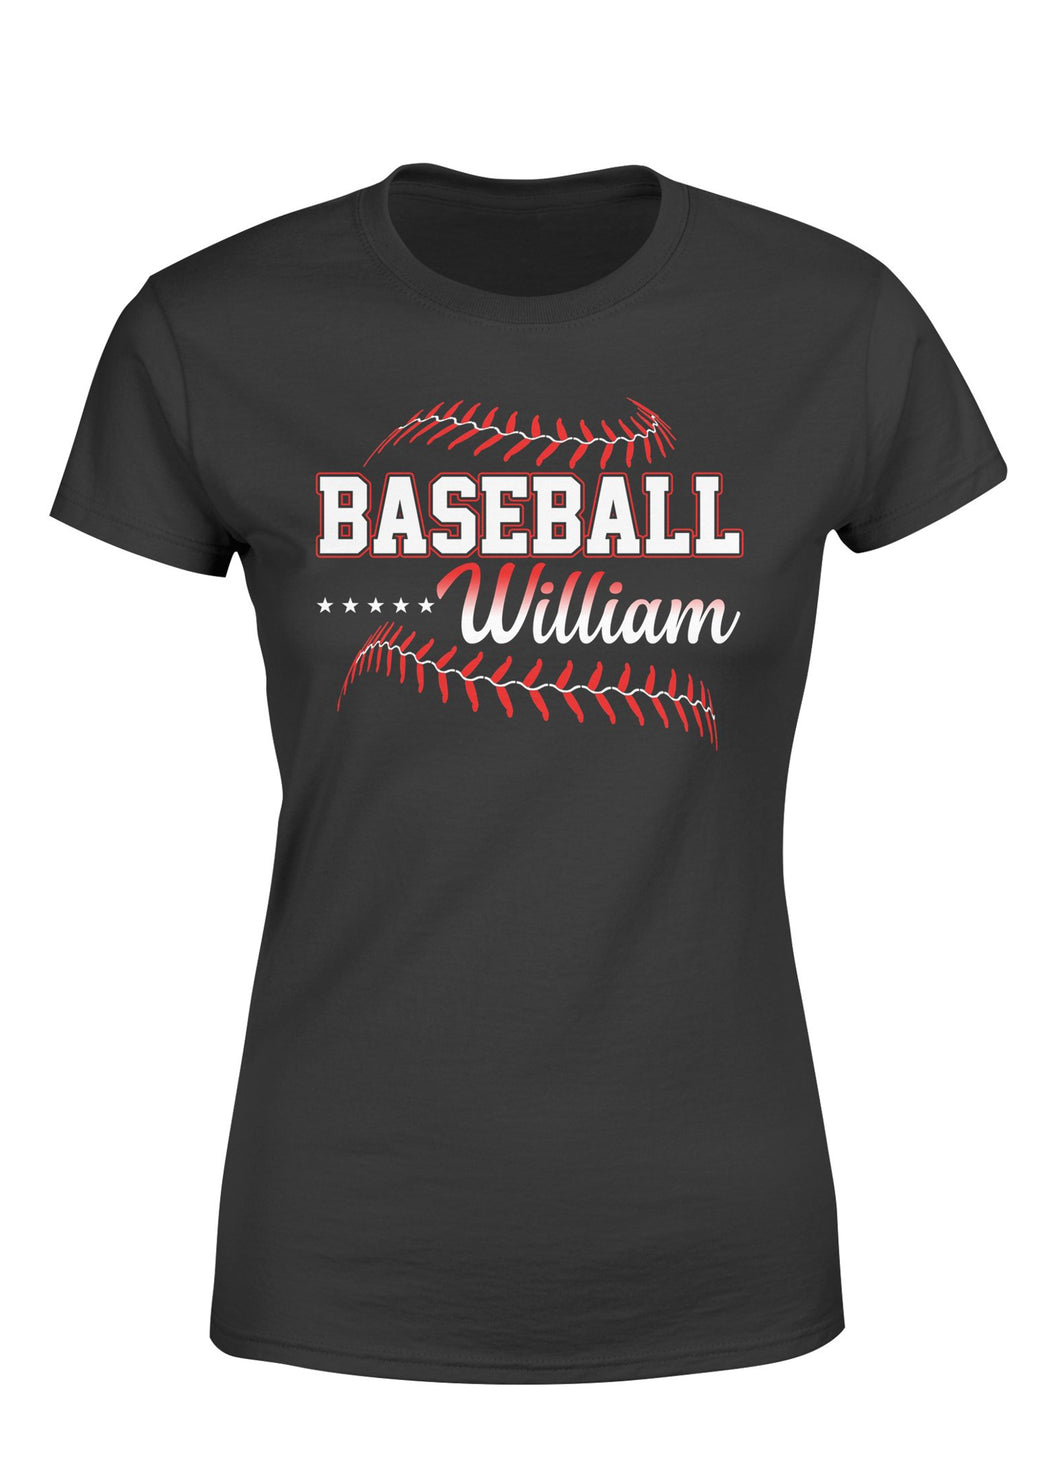 Personalized baseball shirt and hoodie for men and women gift